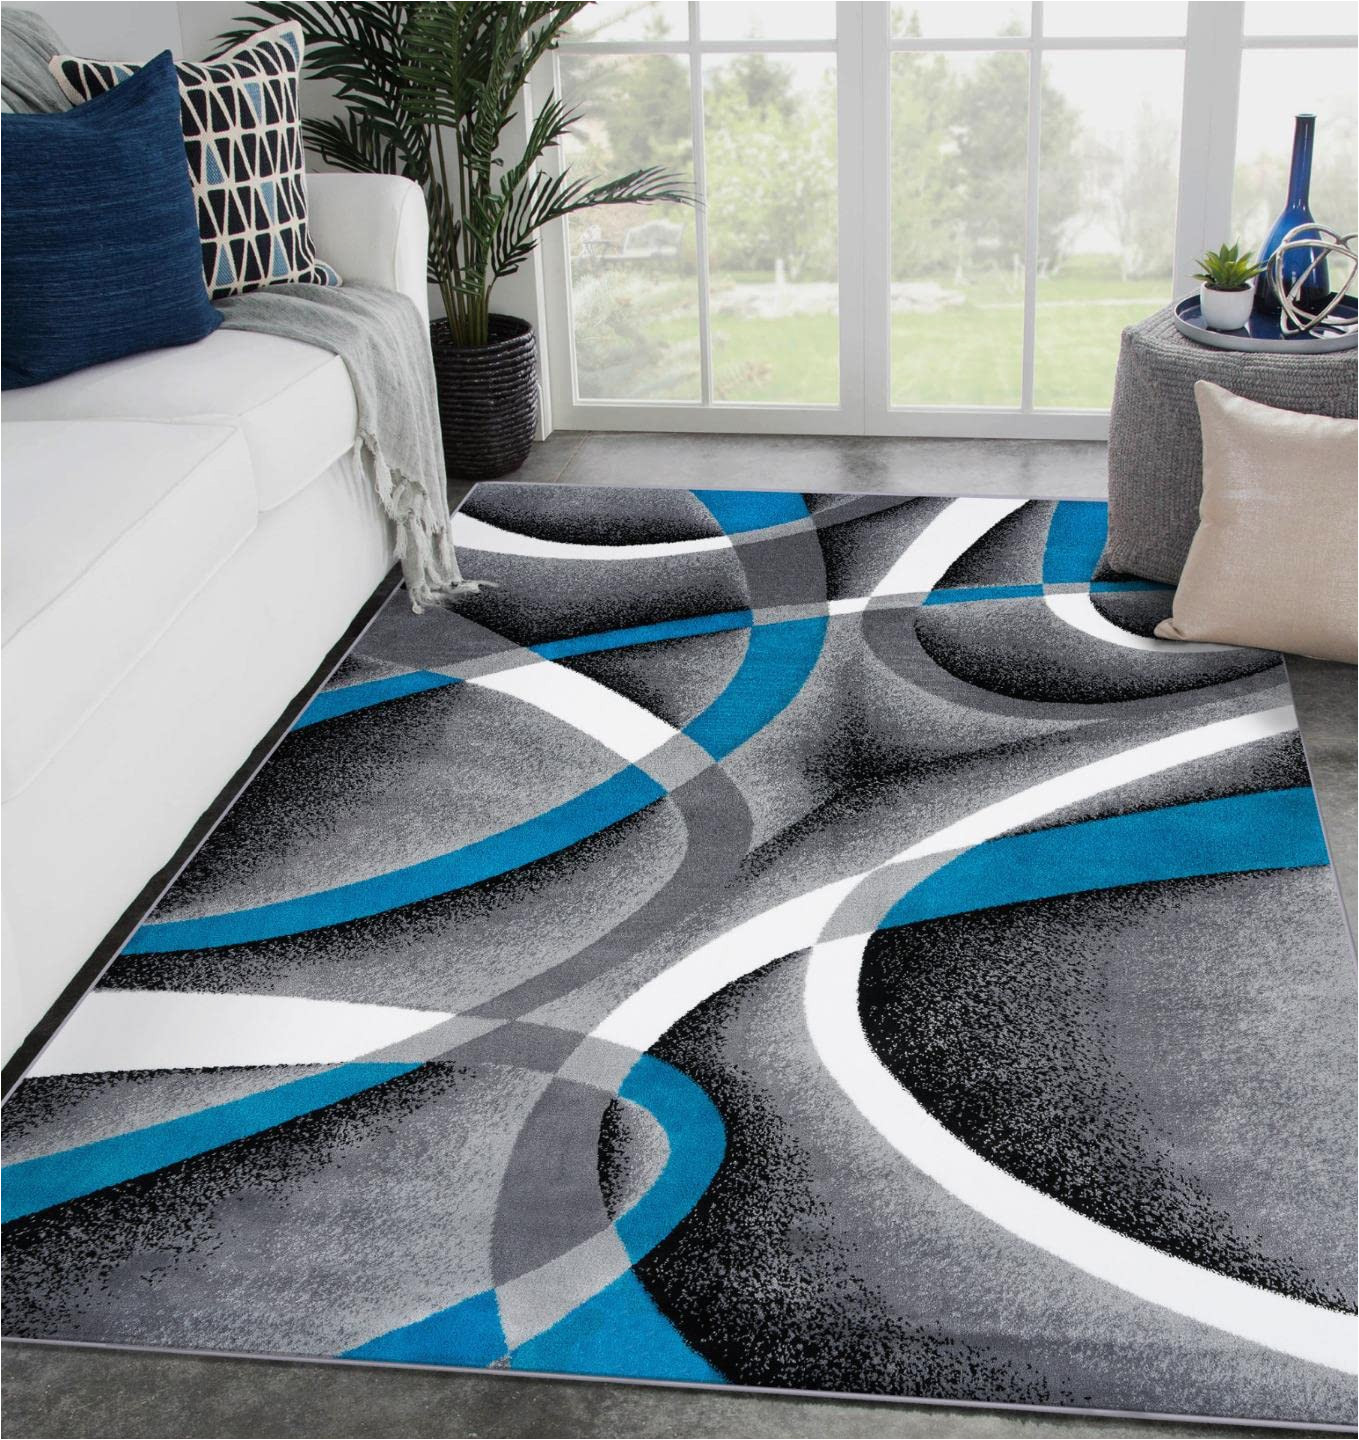 Turquoise Blue area Rugs Persian area Rugs 2305 Turquoise 5’2 X 7’2 Modern Abstract area Rug,2305 Turquoise 5×7